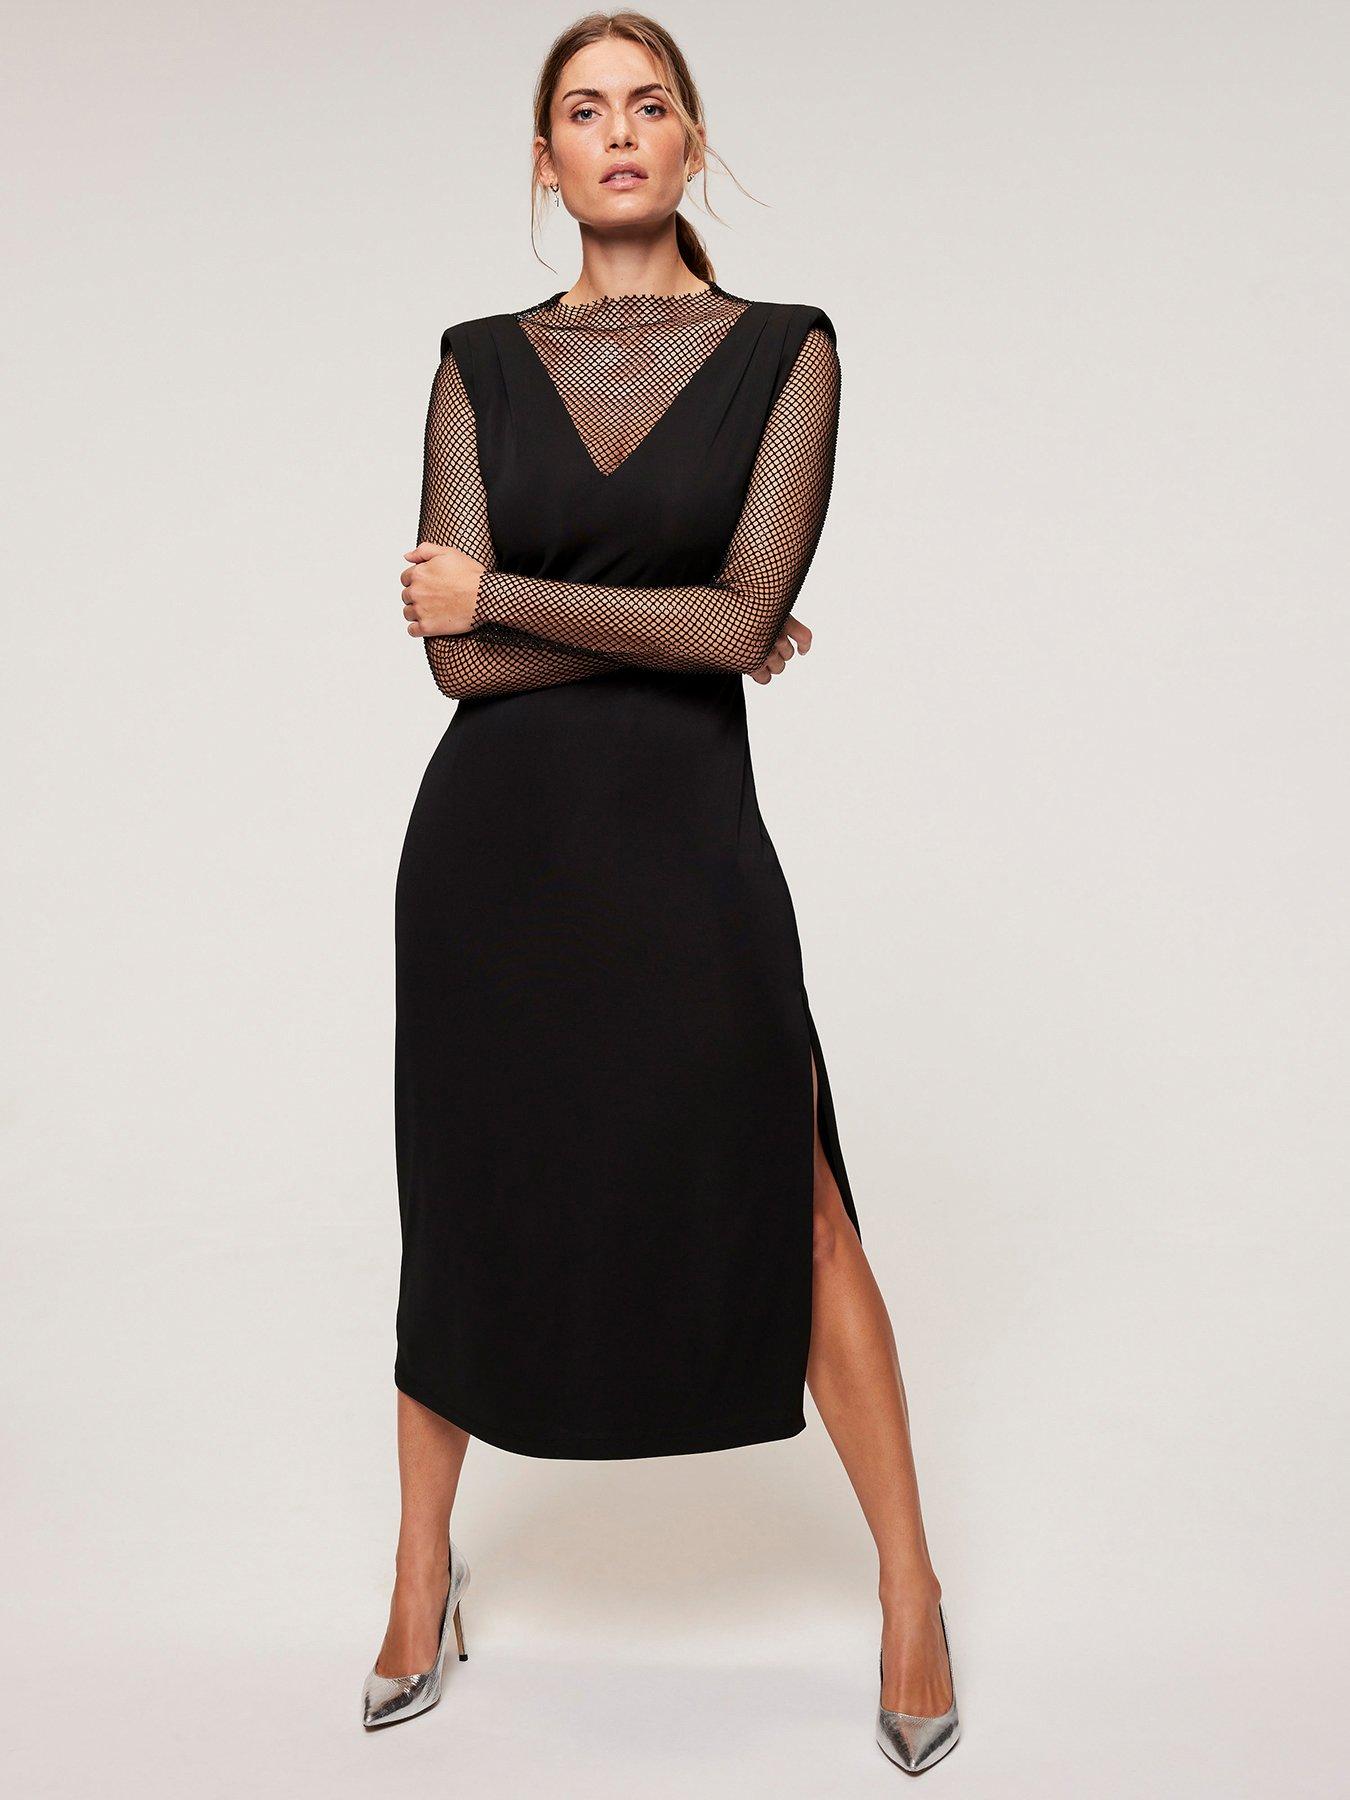 Black Embellished Wrap Midaxi Dress by In The Style x Jac Jossa